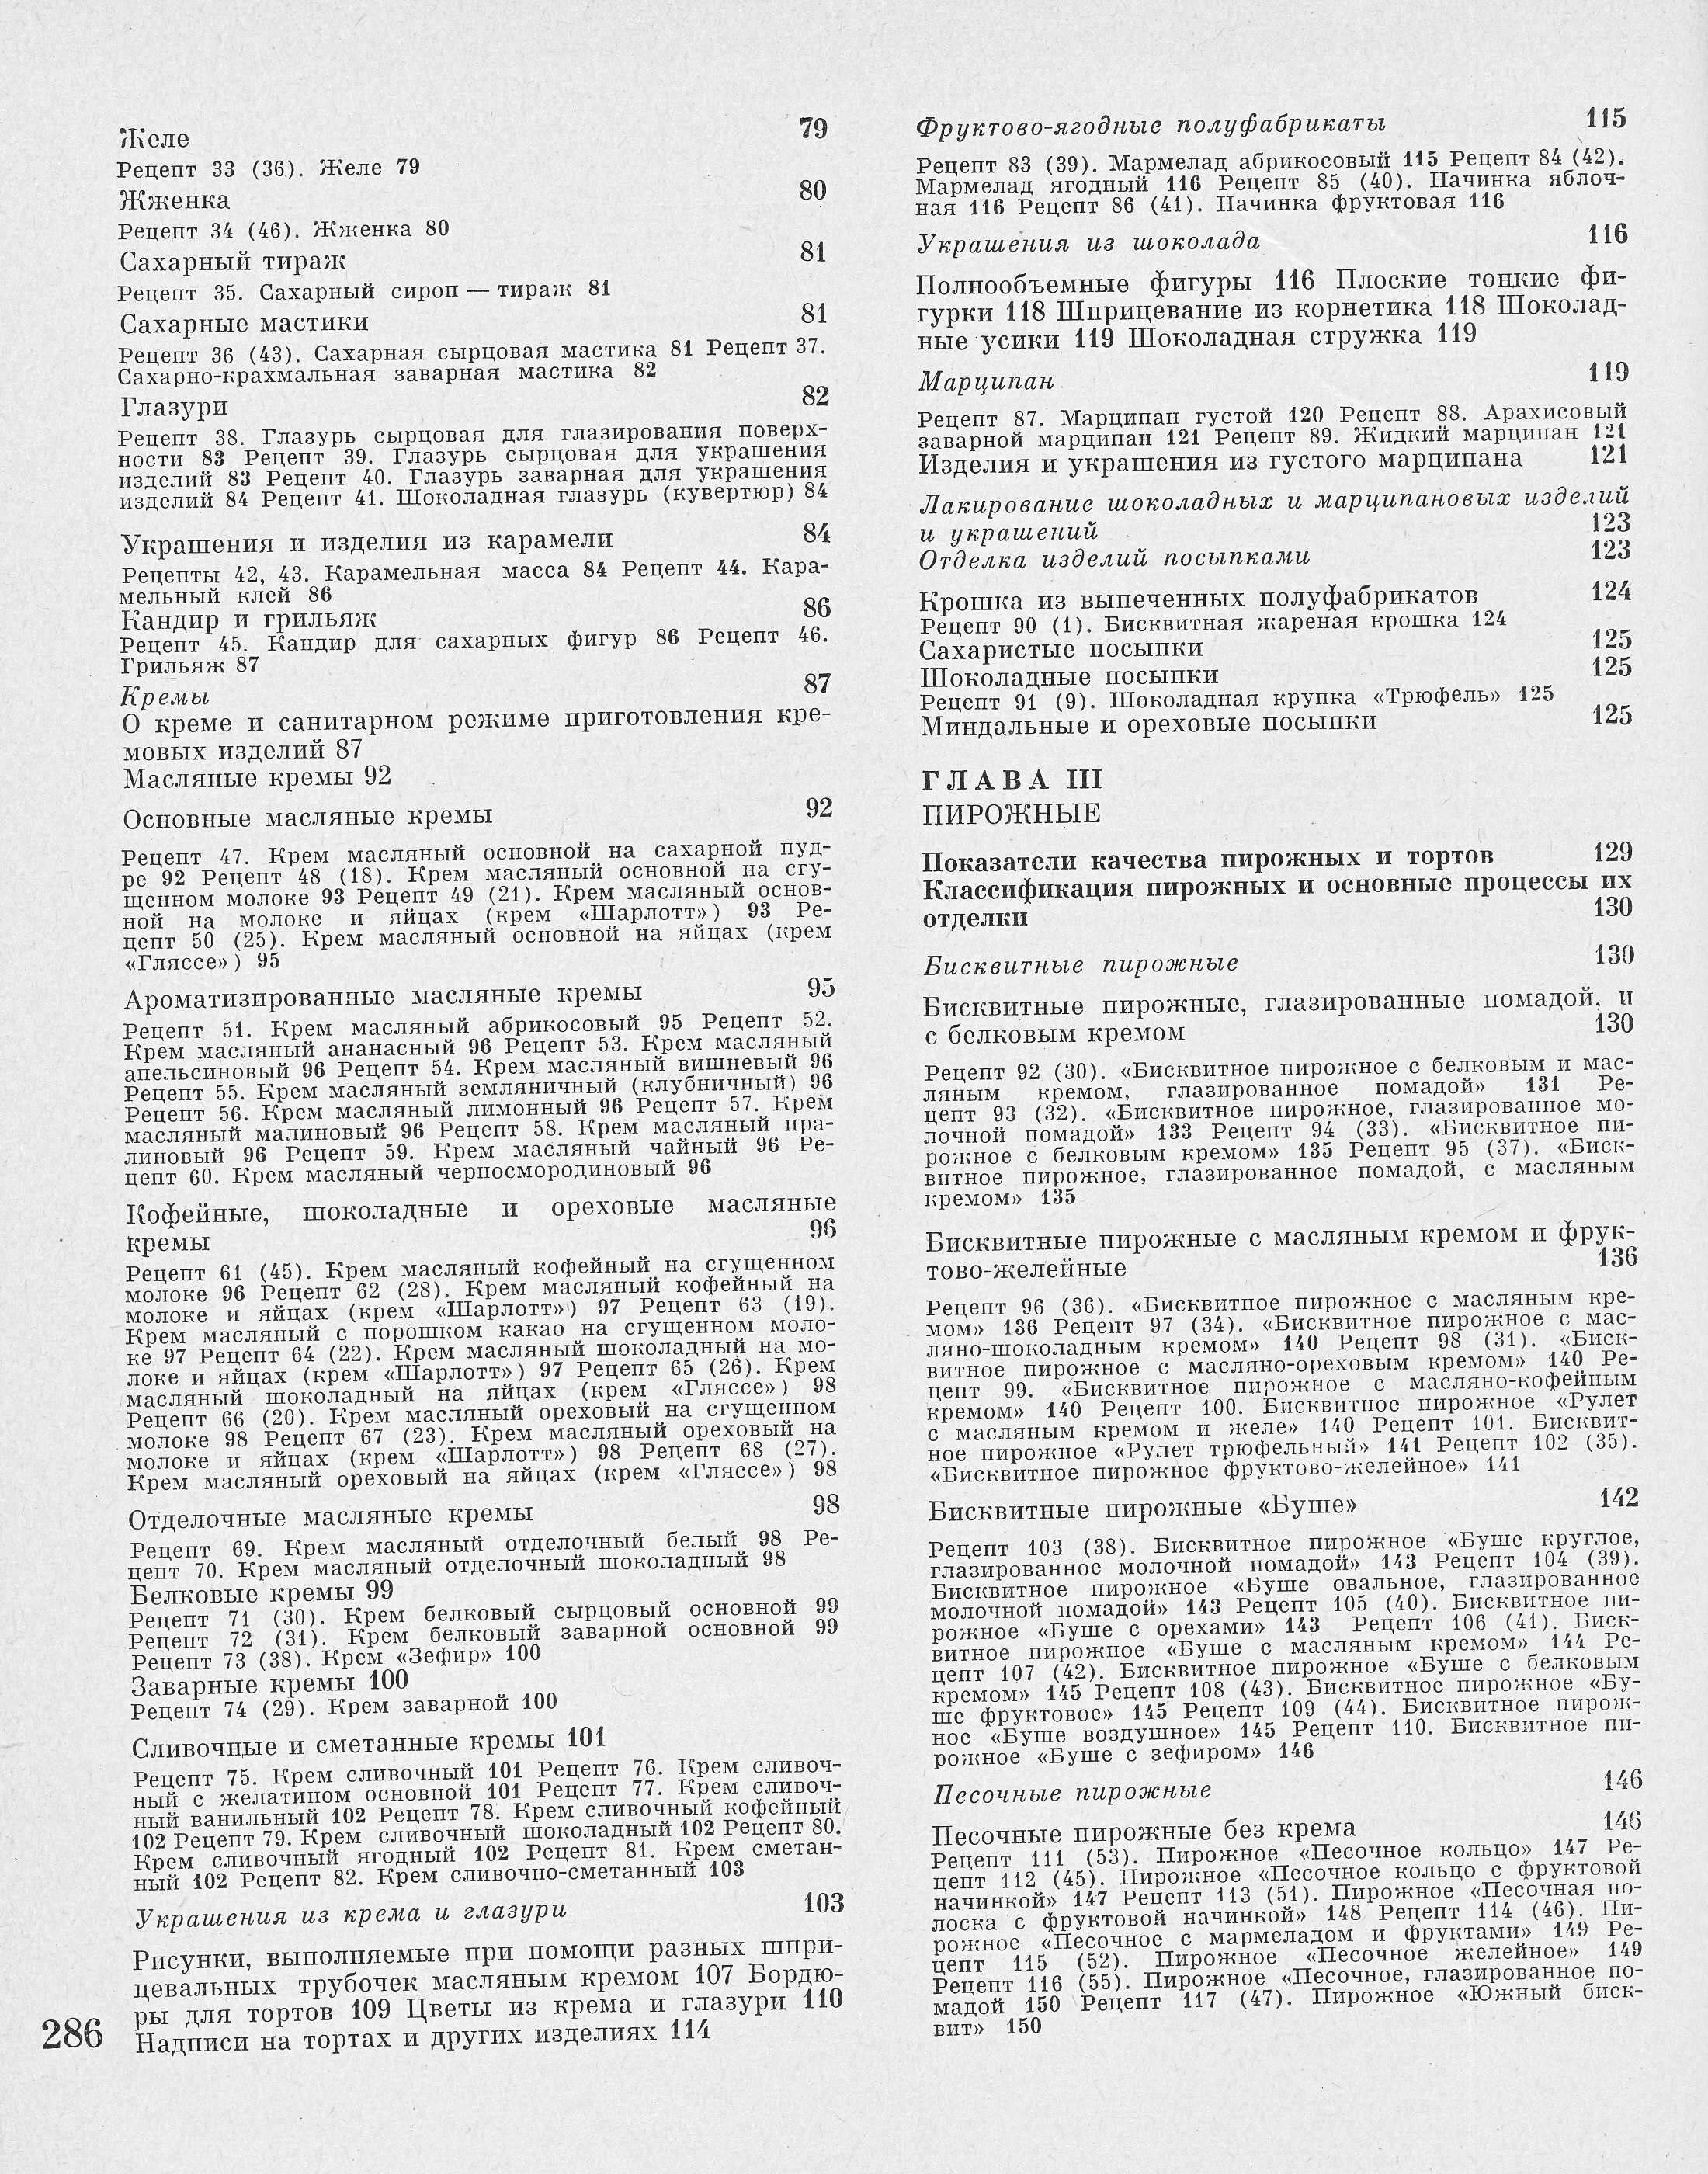 Production of pastries and cakes P.S. Markhel, Yu.L. Gopenshtein, S.V. Smelov 1974  page 286